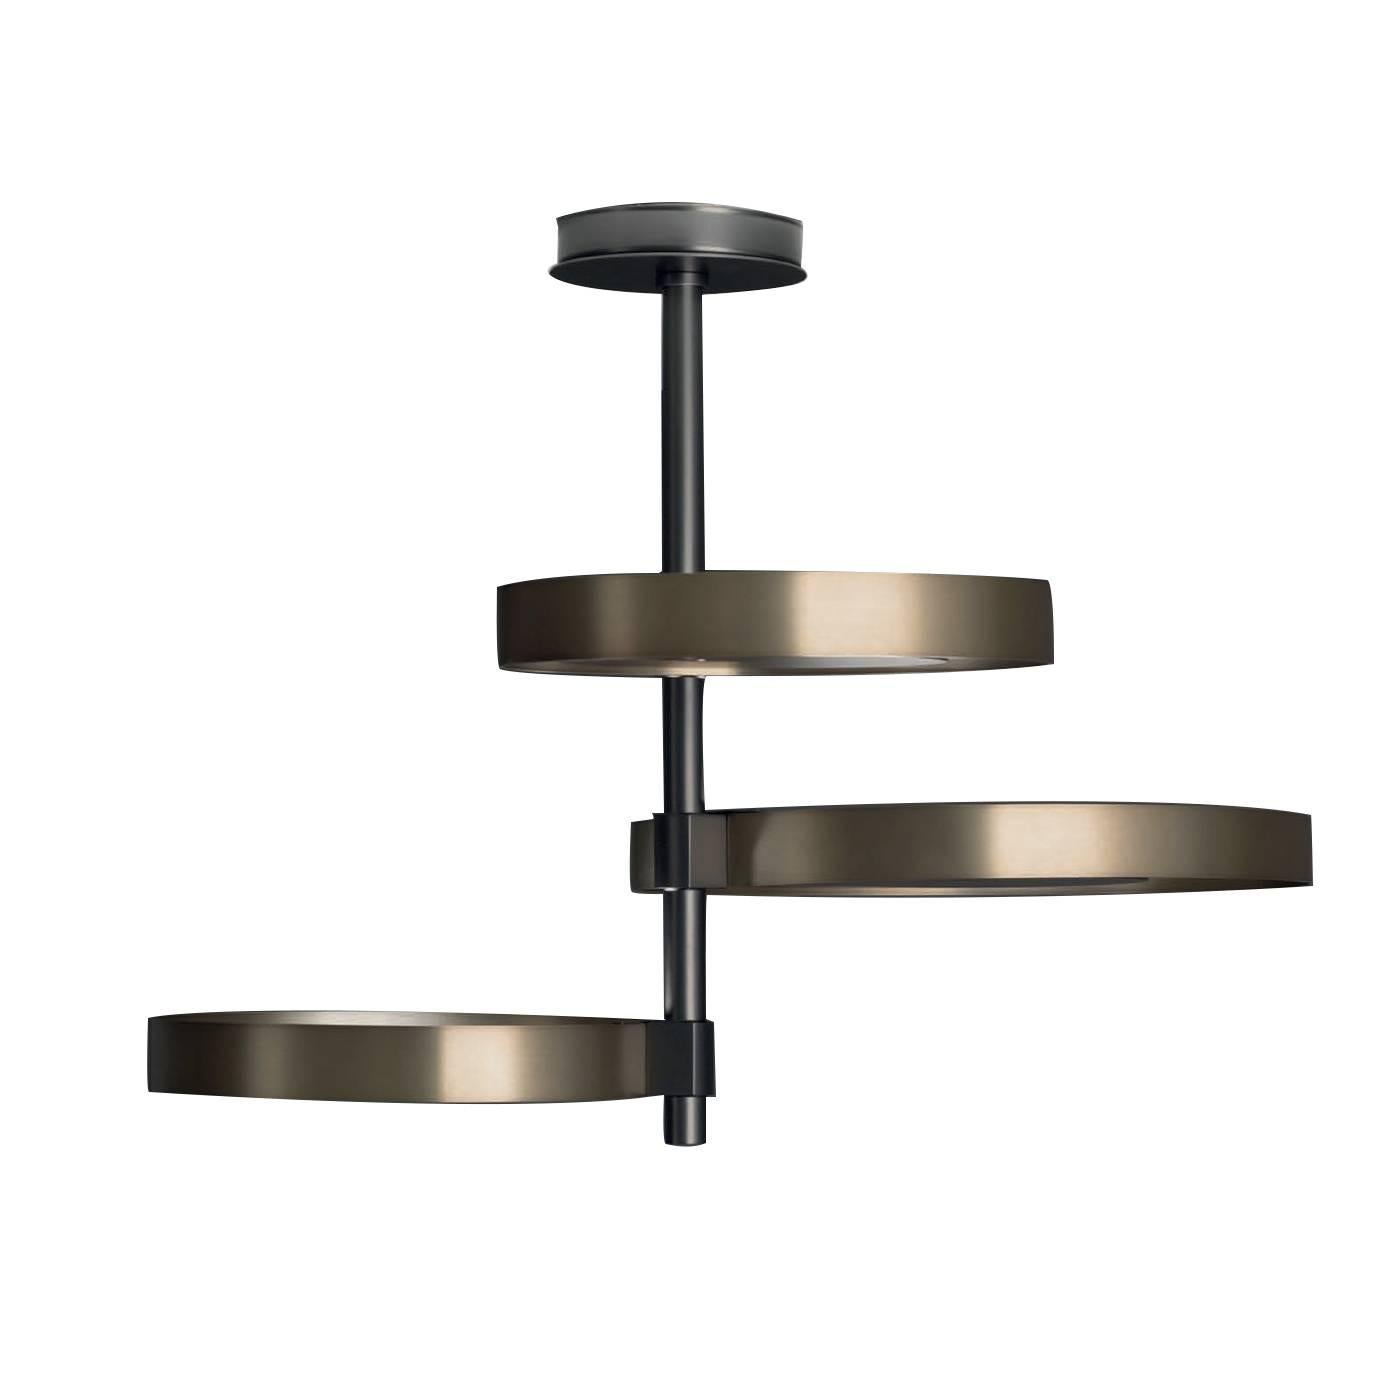 This ceiling lamp projects light upwards, thanks to its unique structure made of three satined natural brass rings enclosing three matte black nickel shades placed in different directions that shield the bulb and diffuse the light creating a